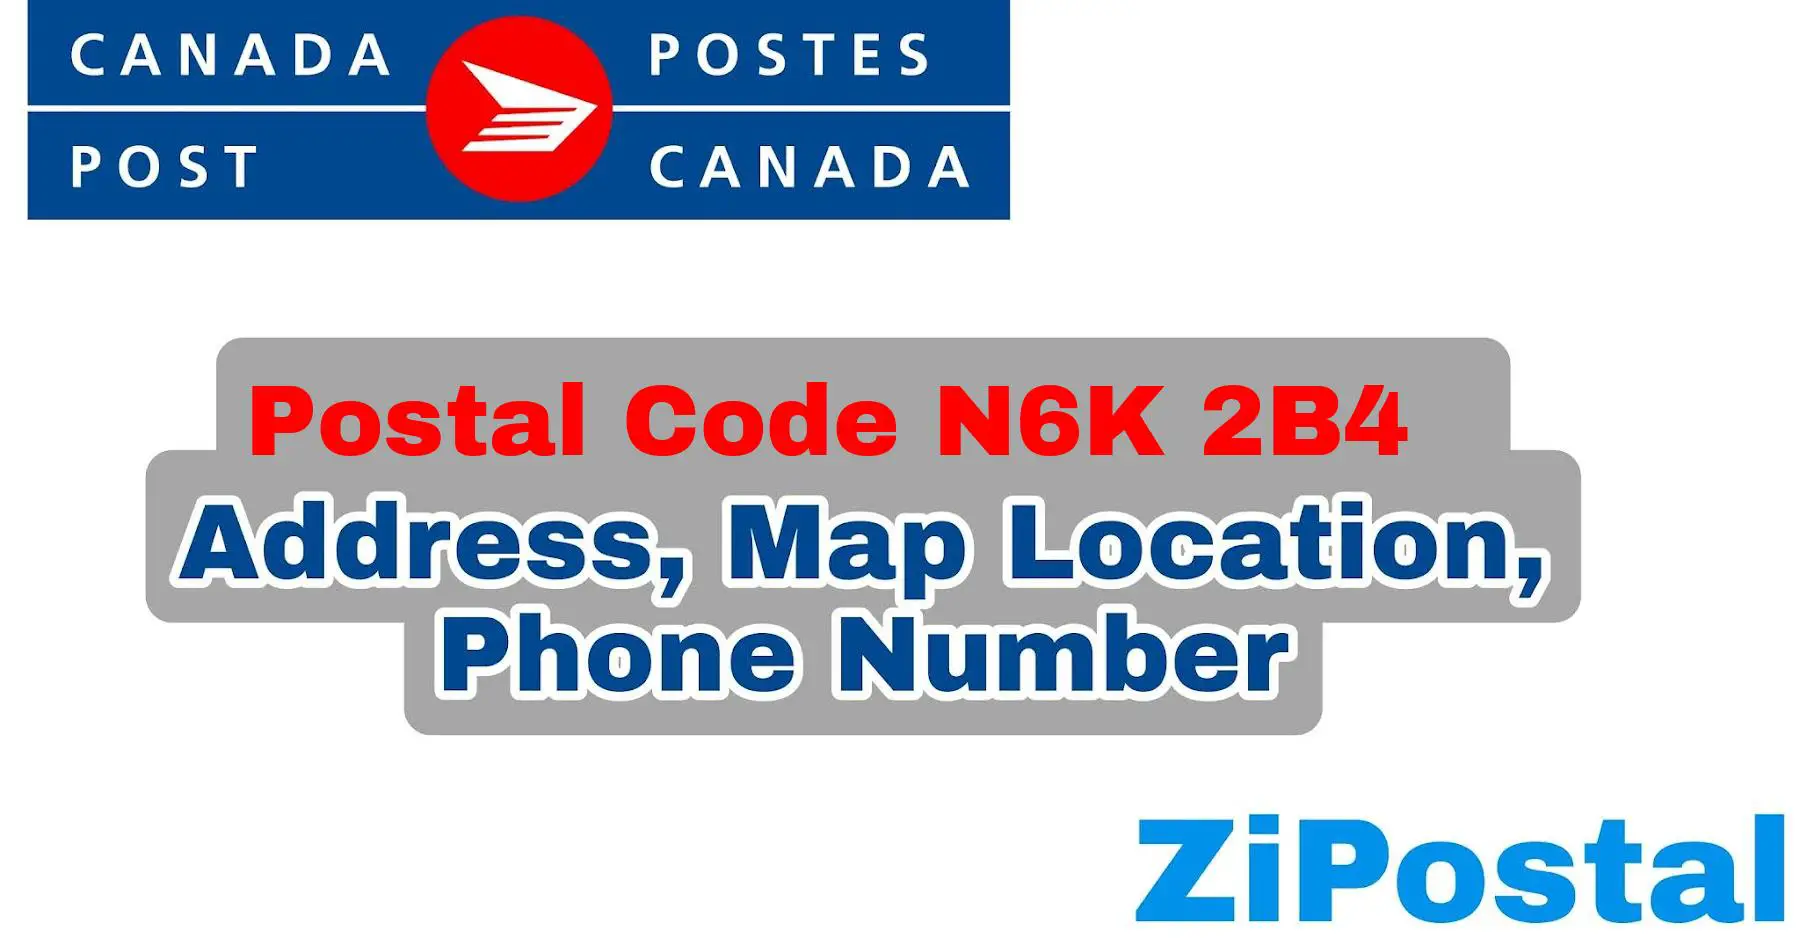 Postal Code N6K 2B4 Address Map Location and Phone Number